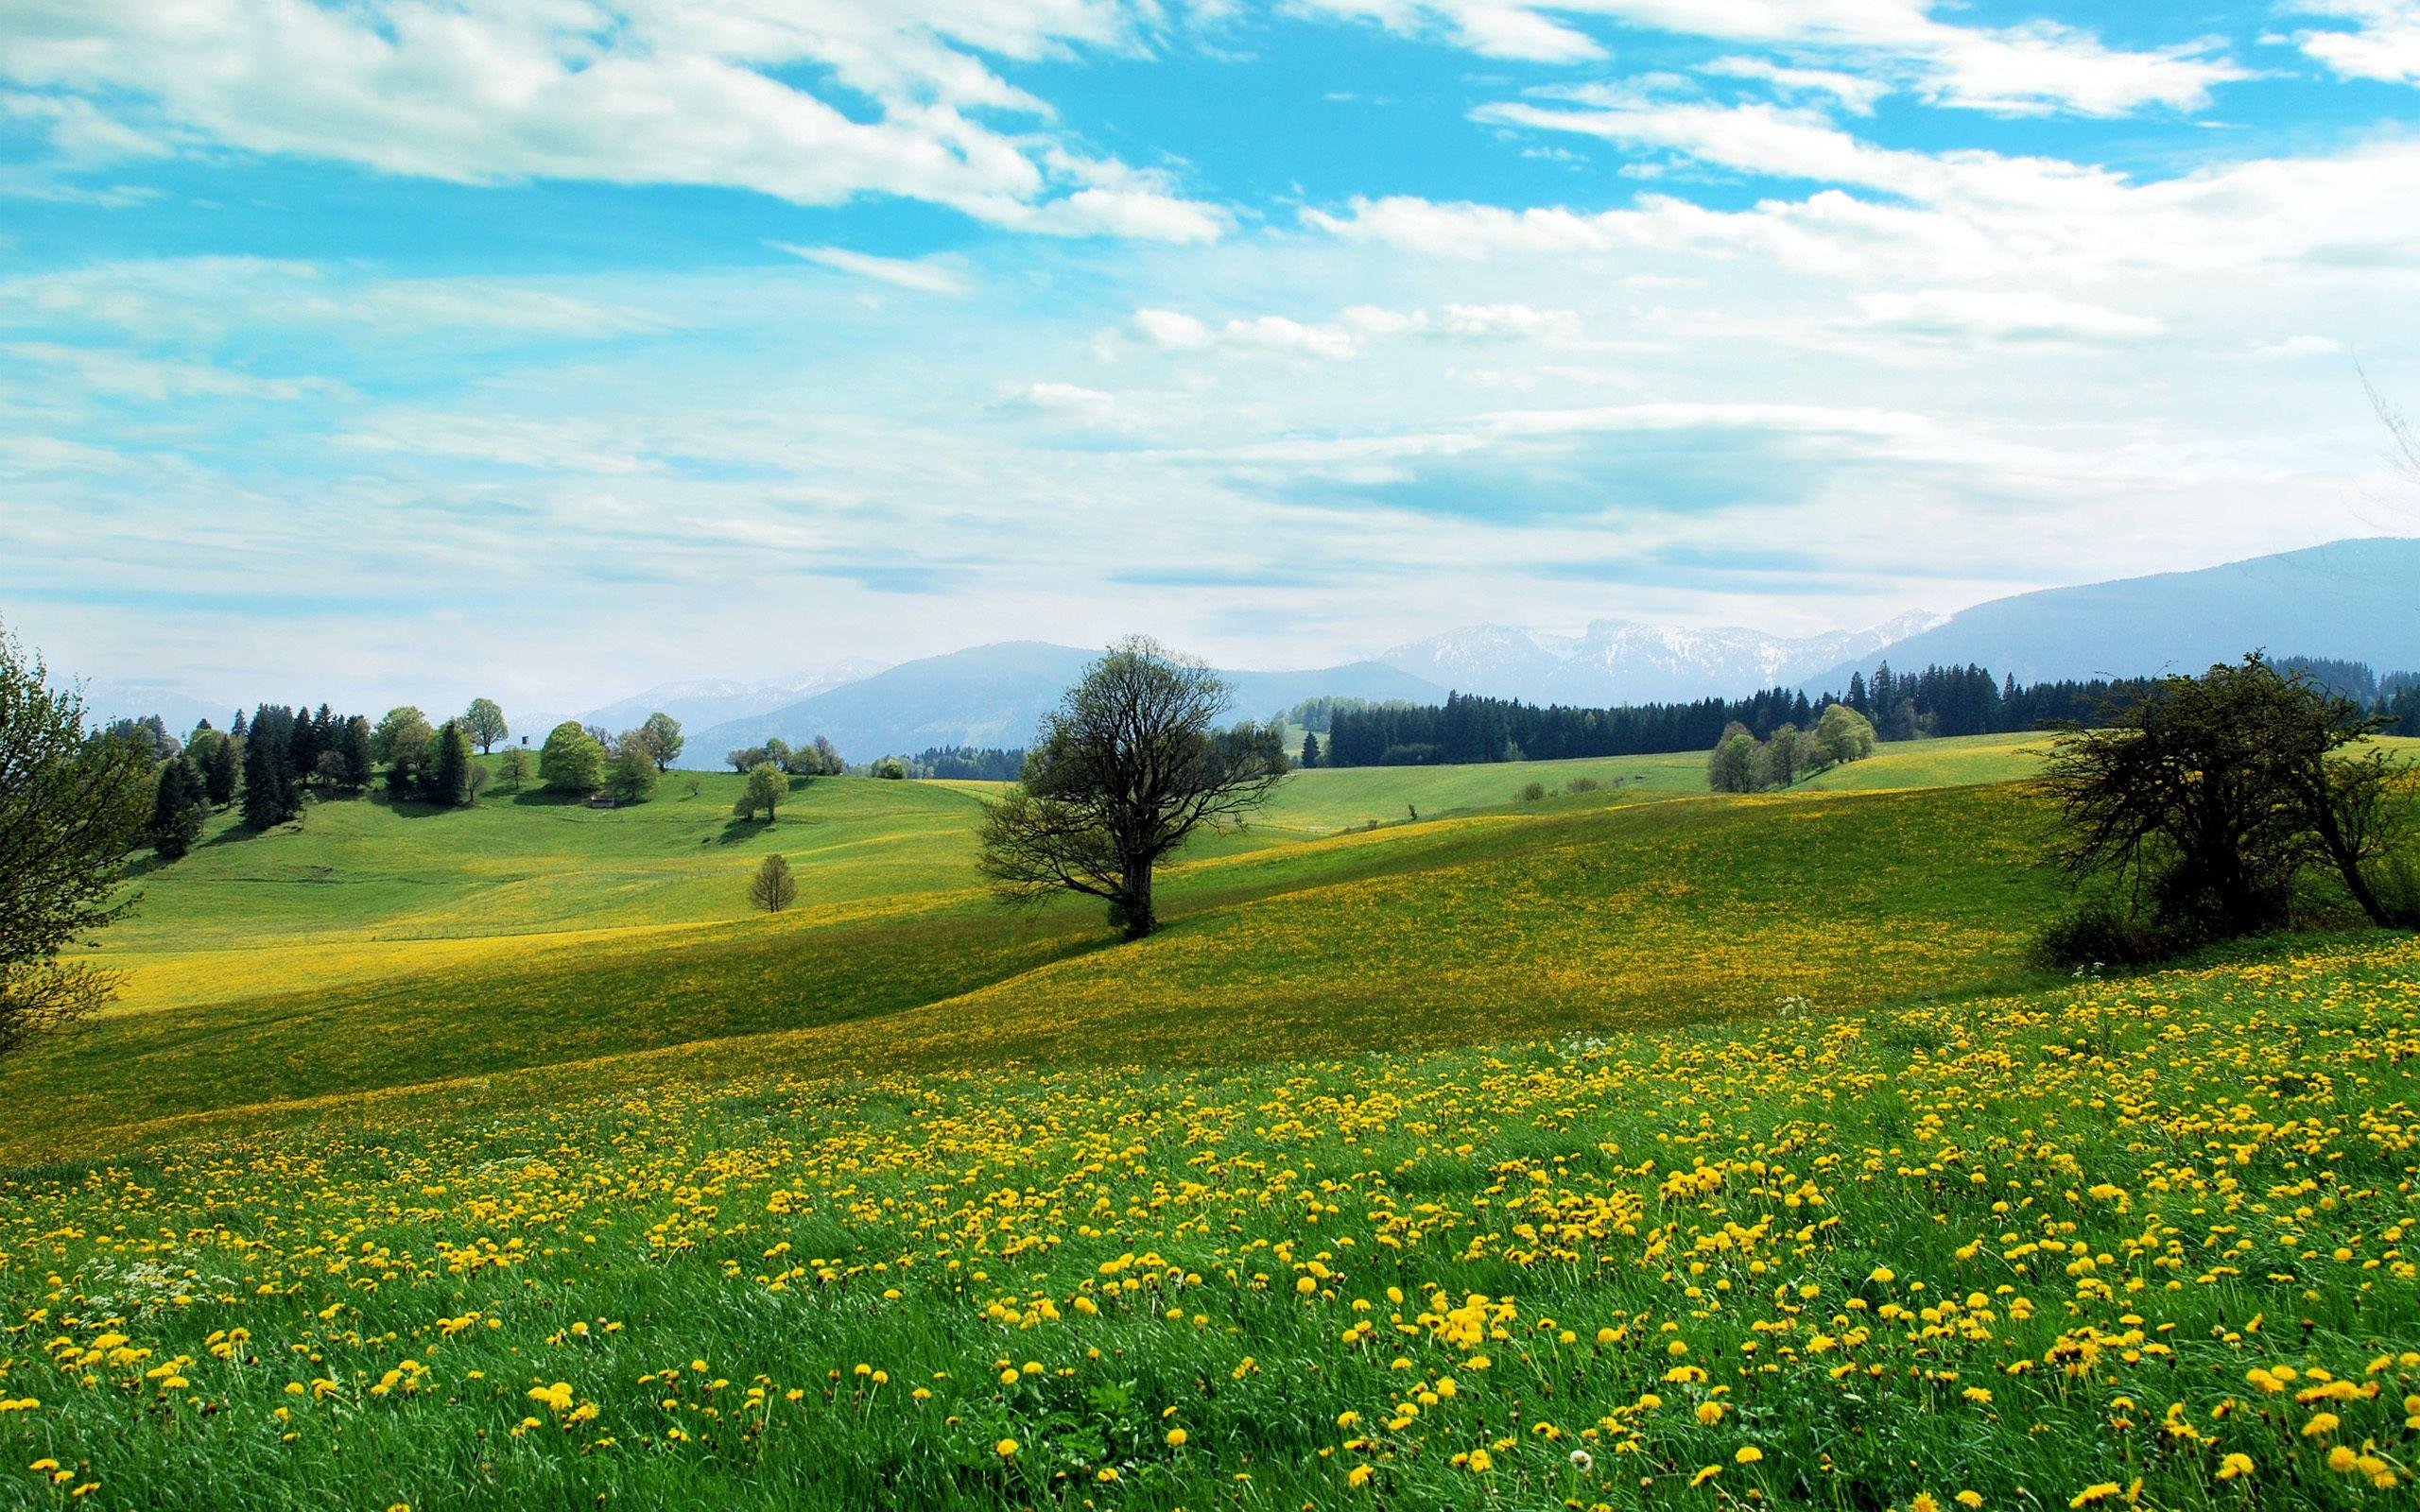 Beautiful meadow with yellow flowers. Scenery wallpaper, Cool